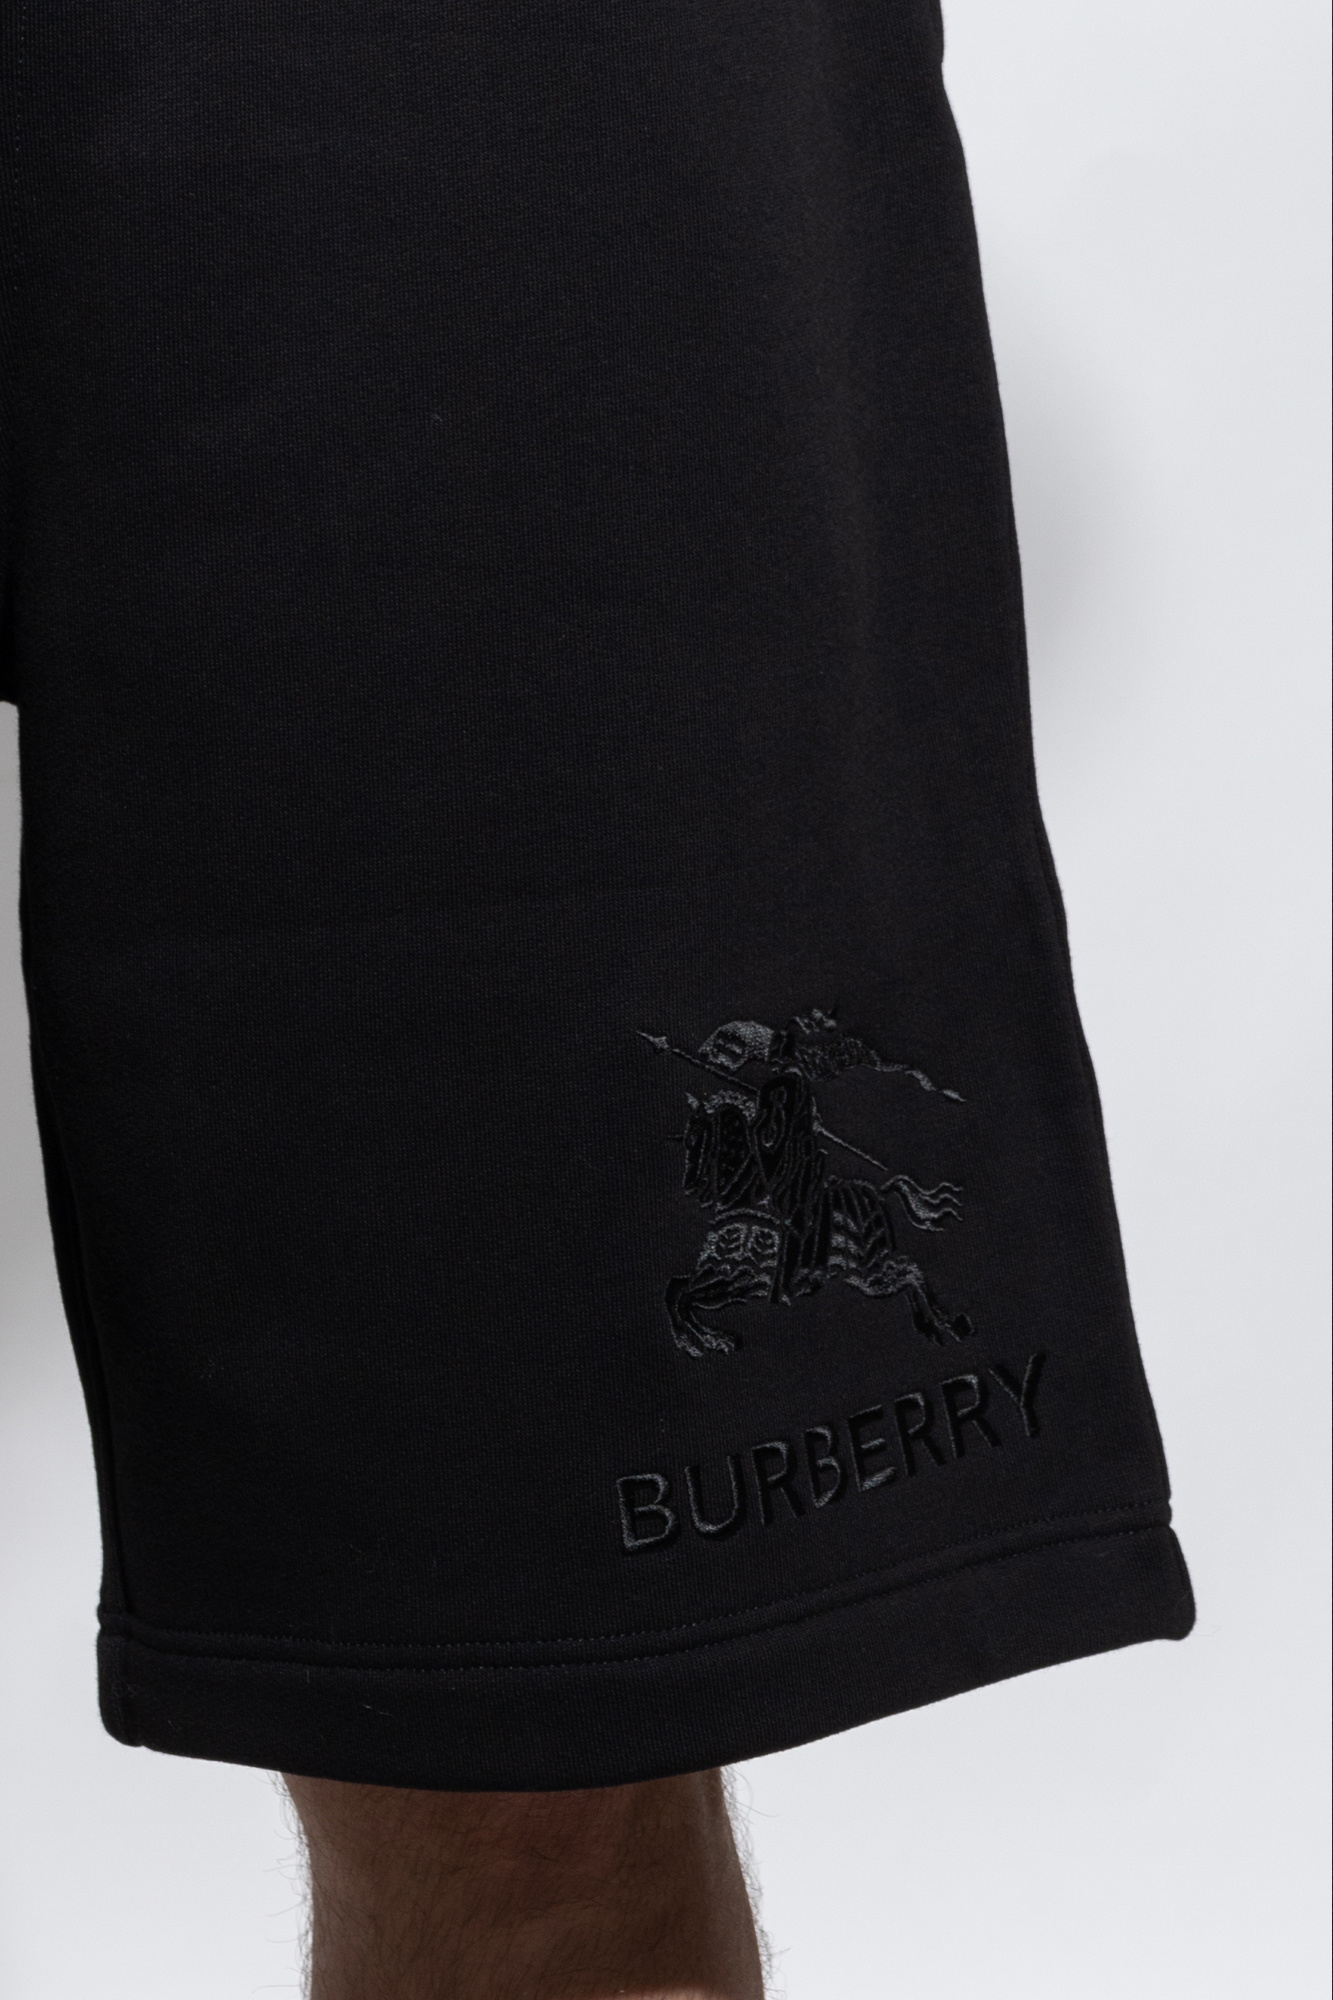 Burberry 'Taylor' shorts with logo, Men's Clothing